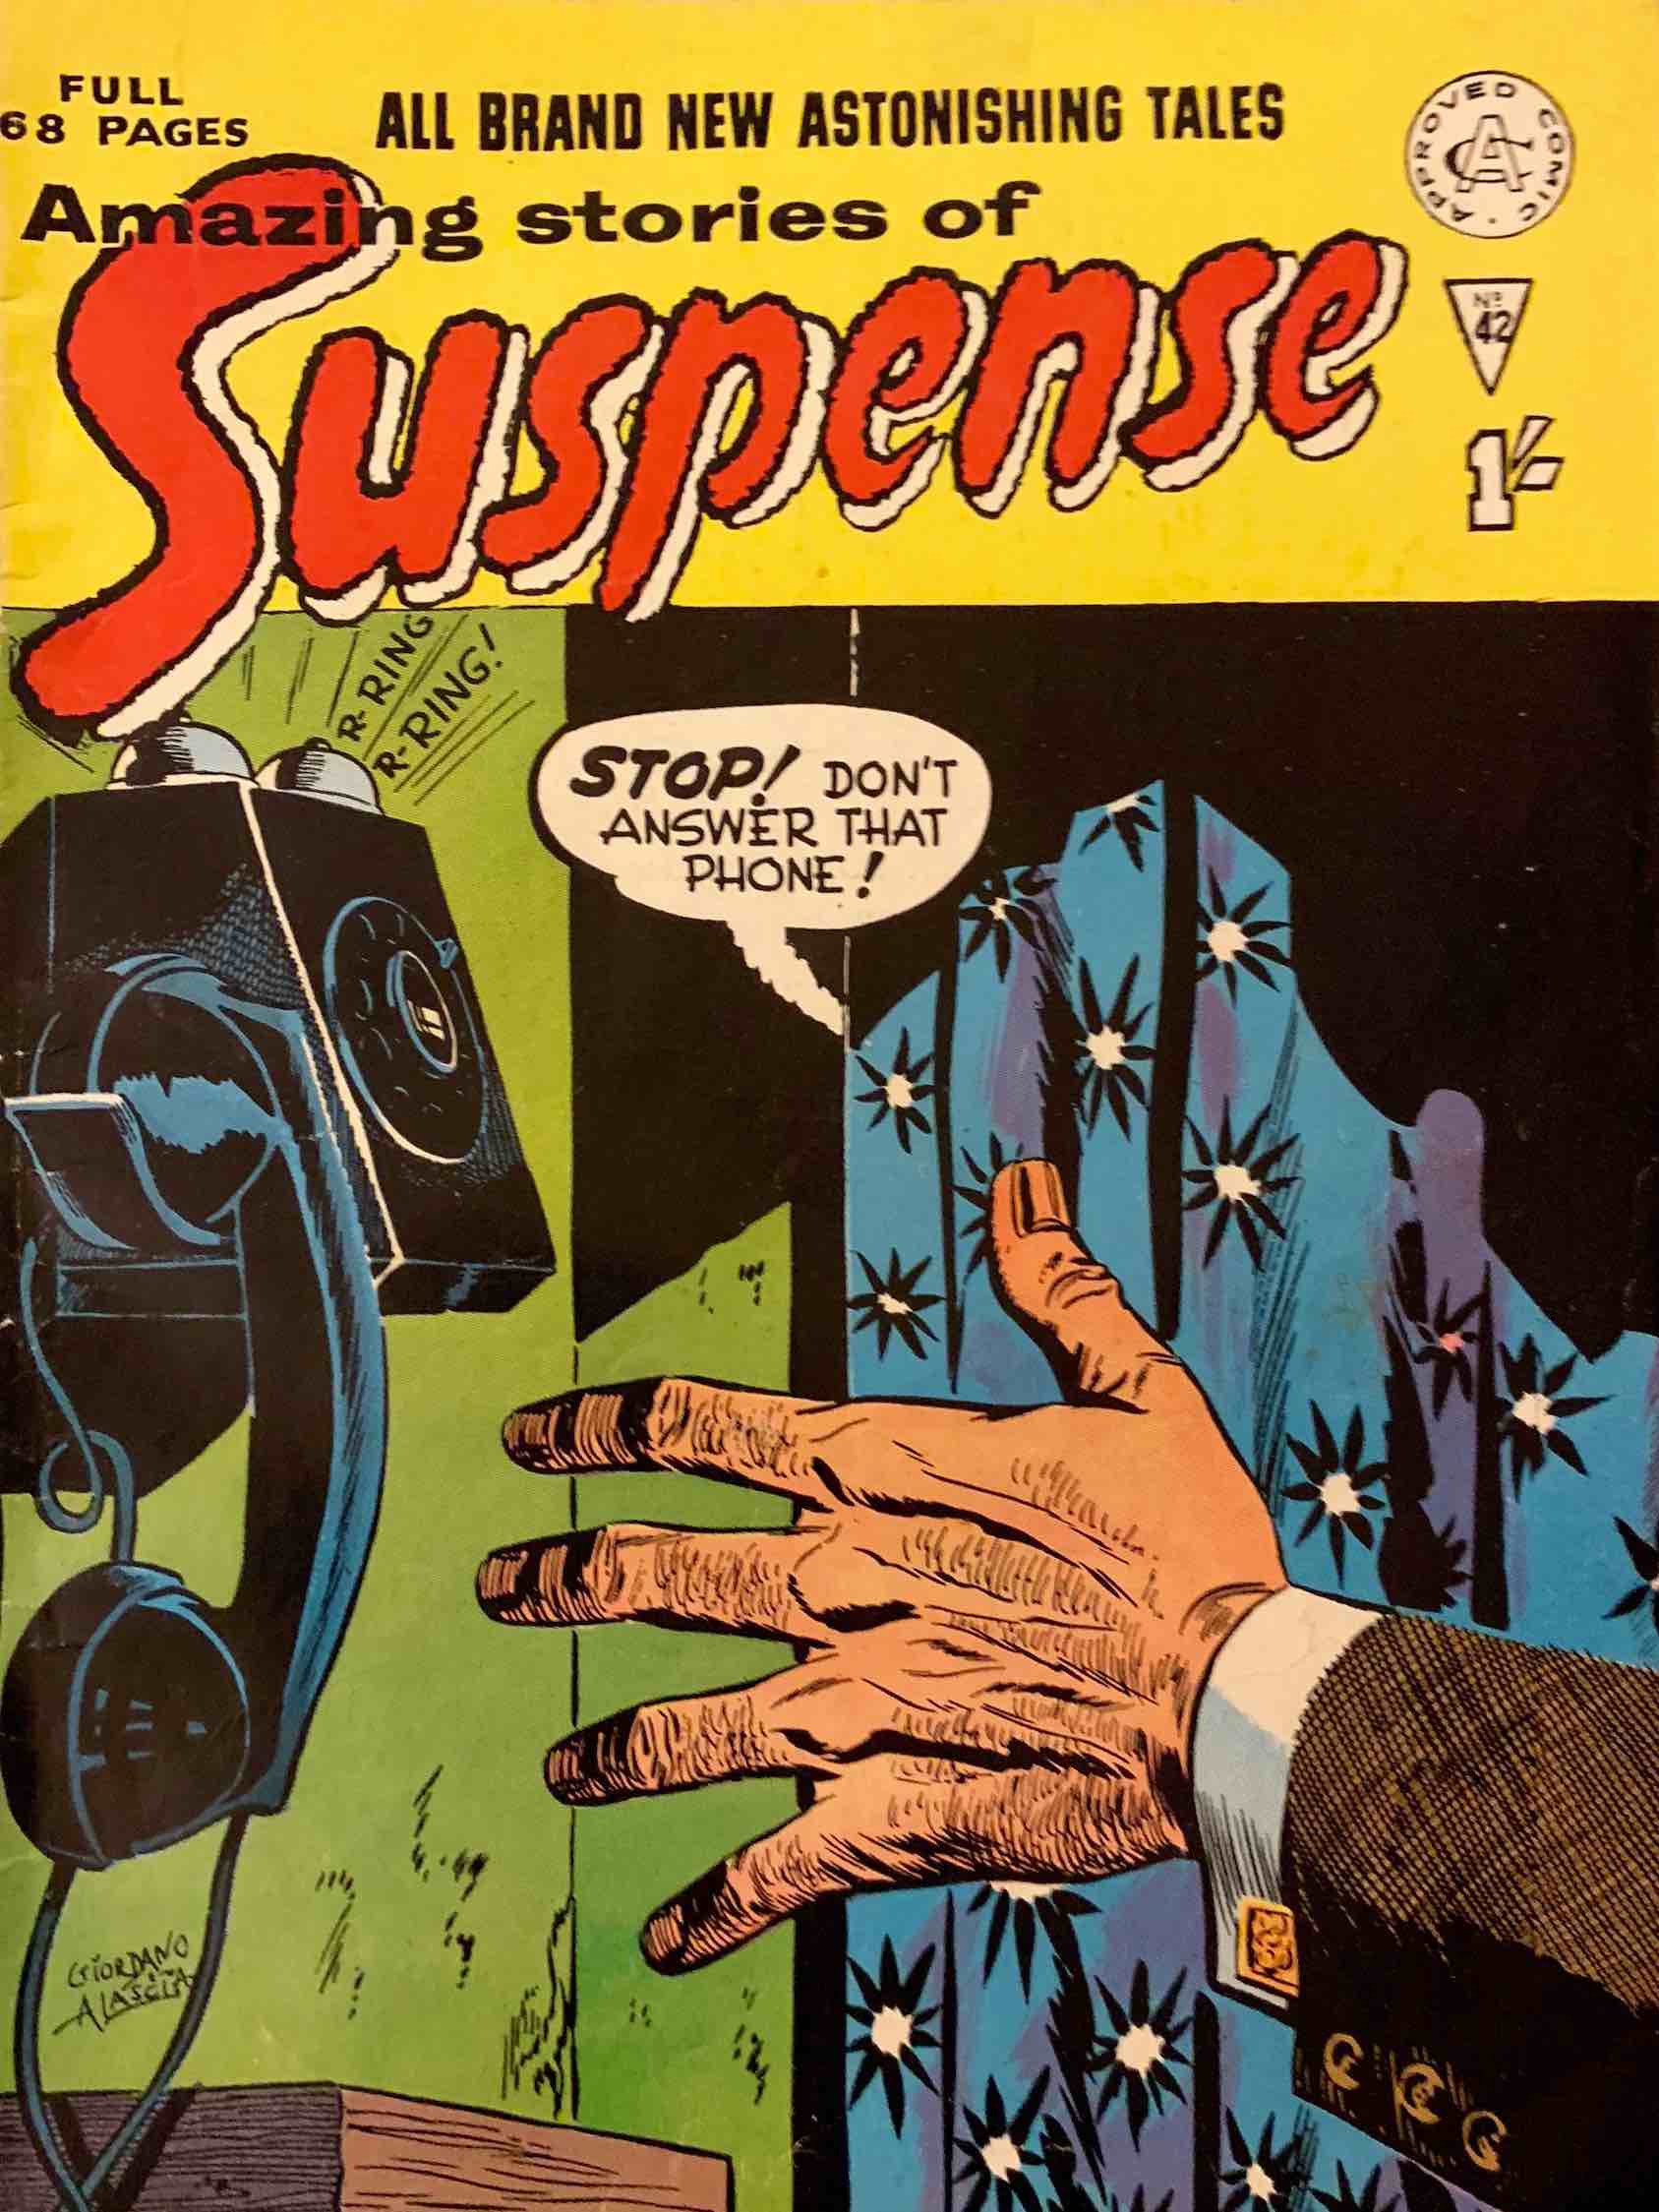 Book Cover For Amazing Stories of Suspense 42